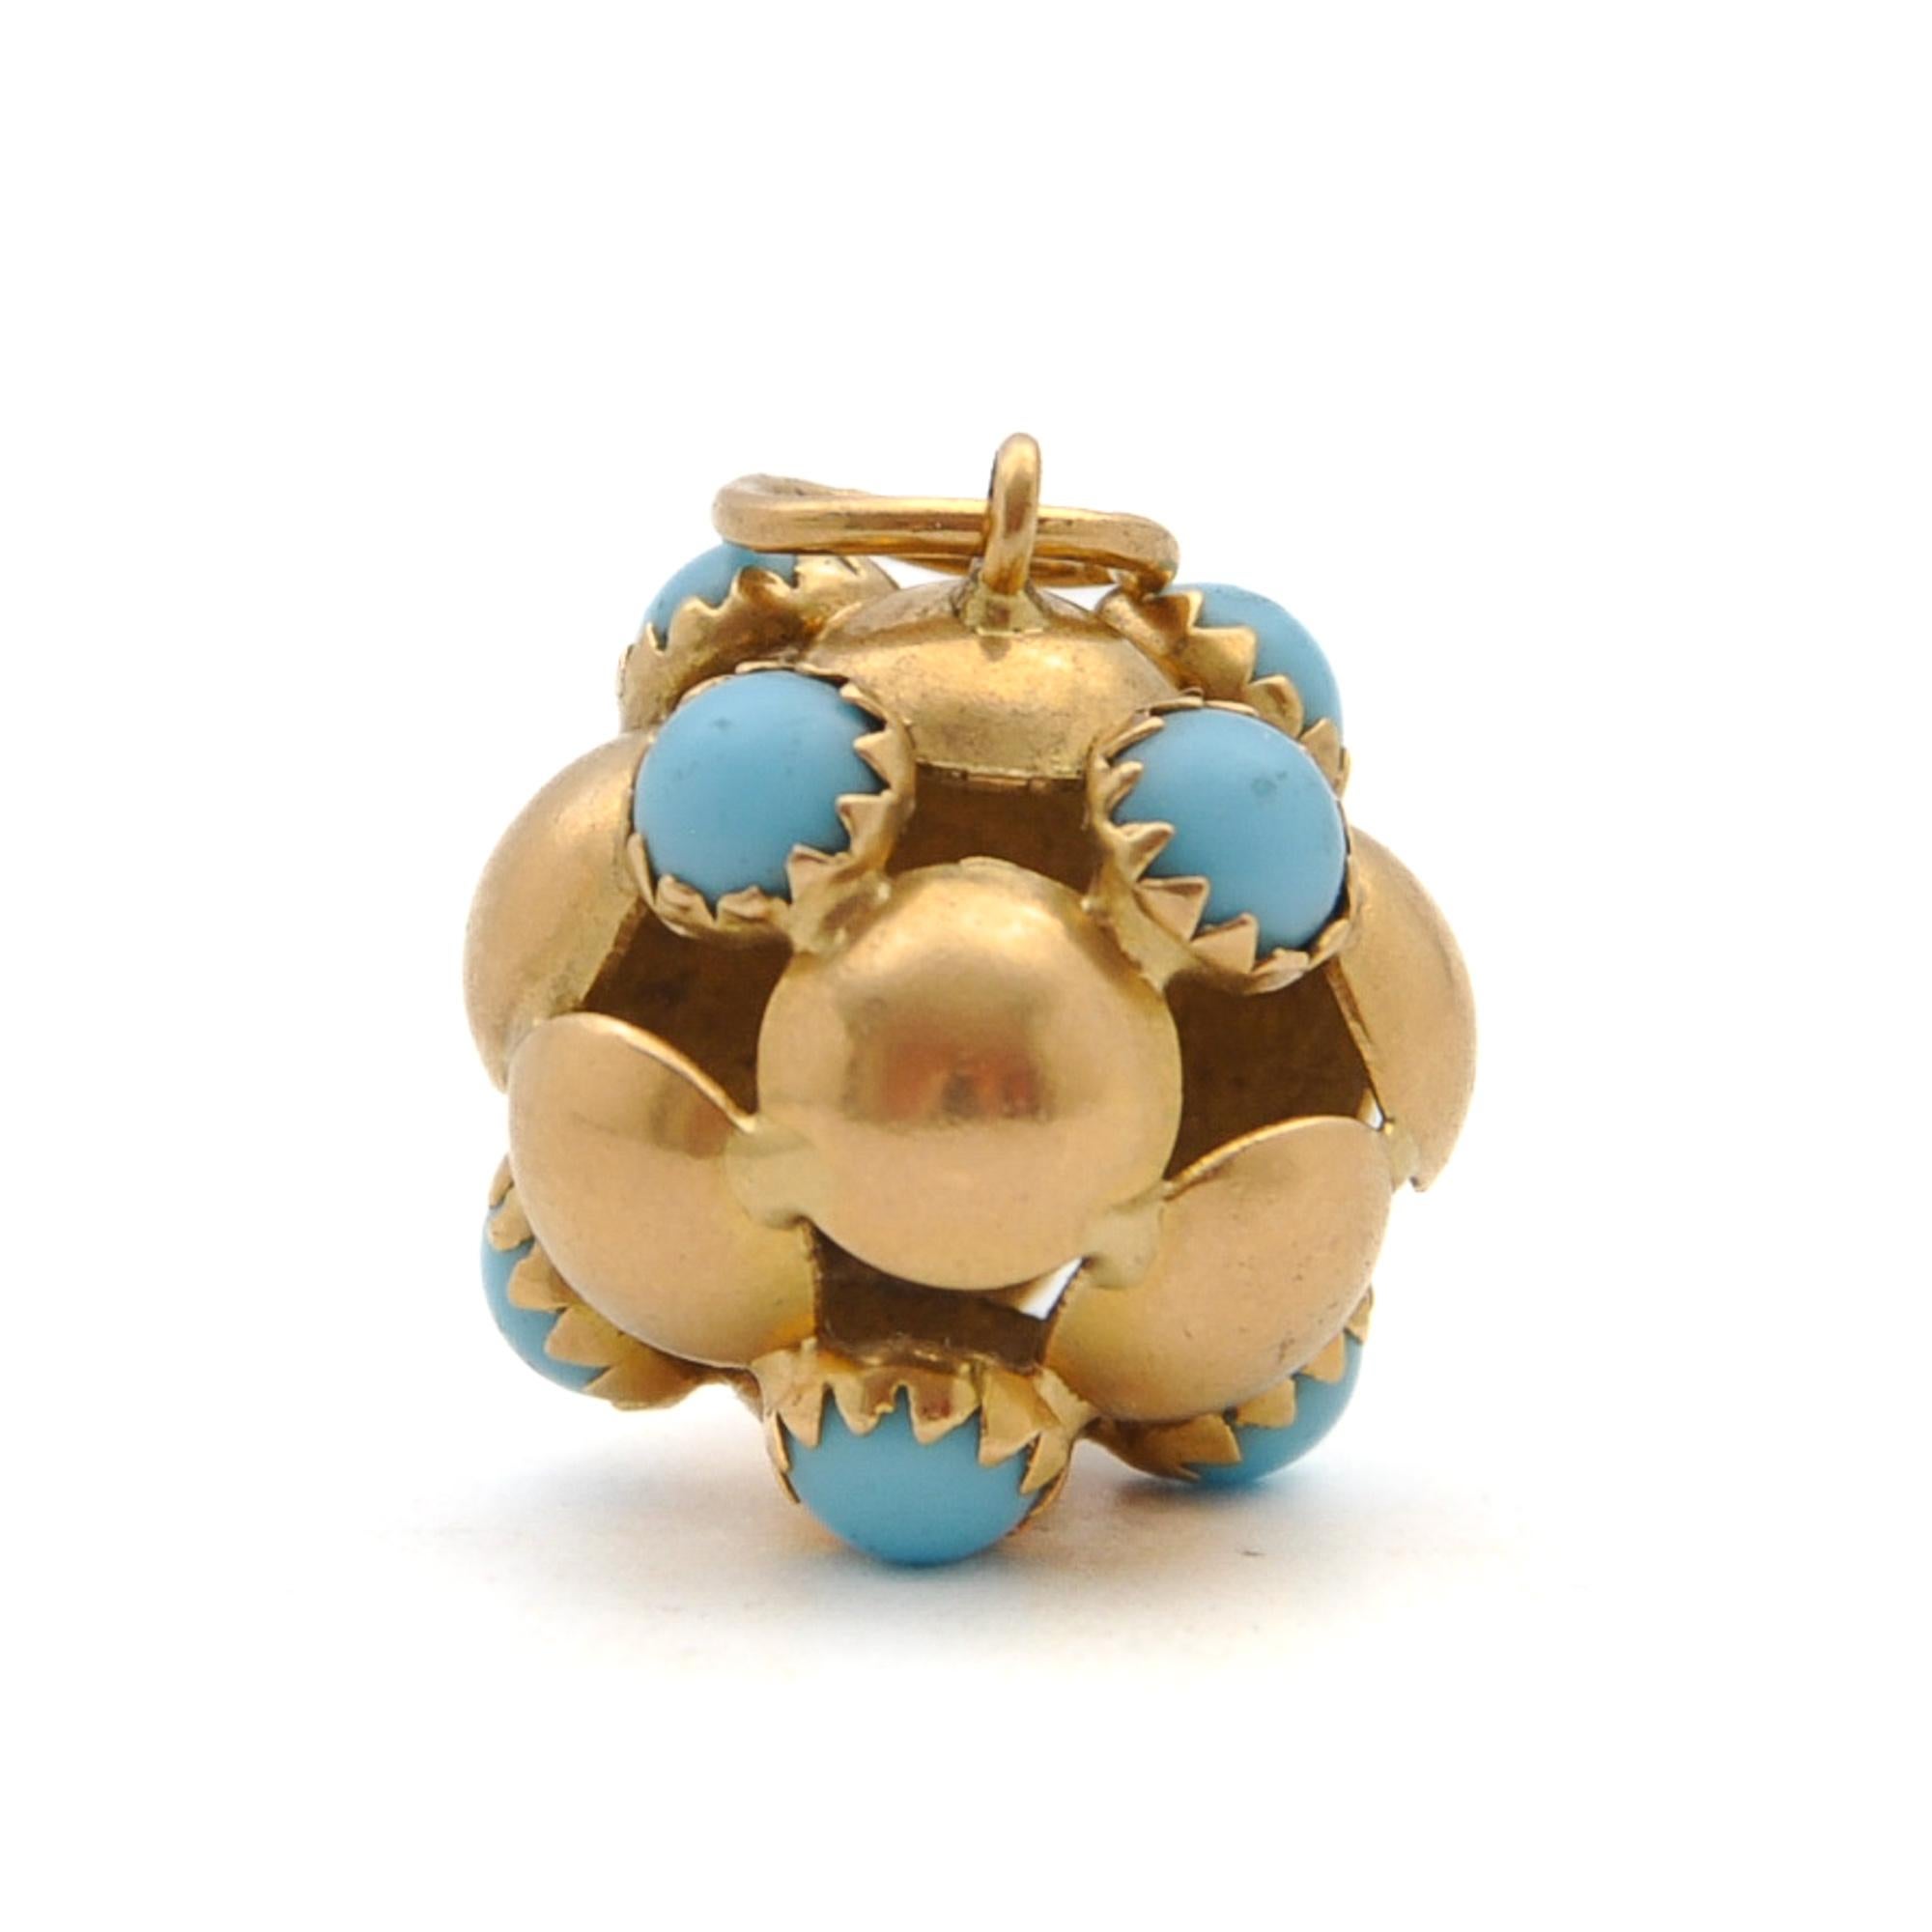 Vintage 18K Gold and Turquoise Ball Charm Pendant For Sale